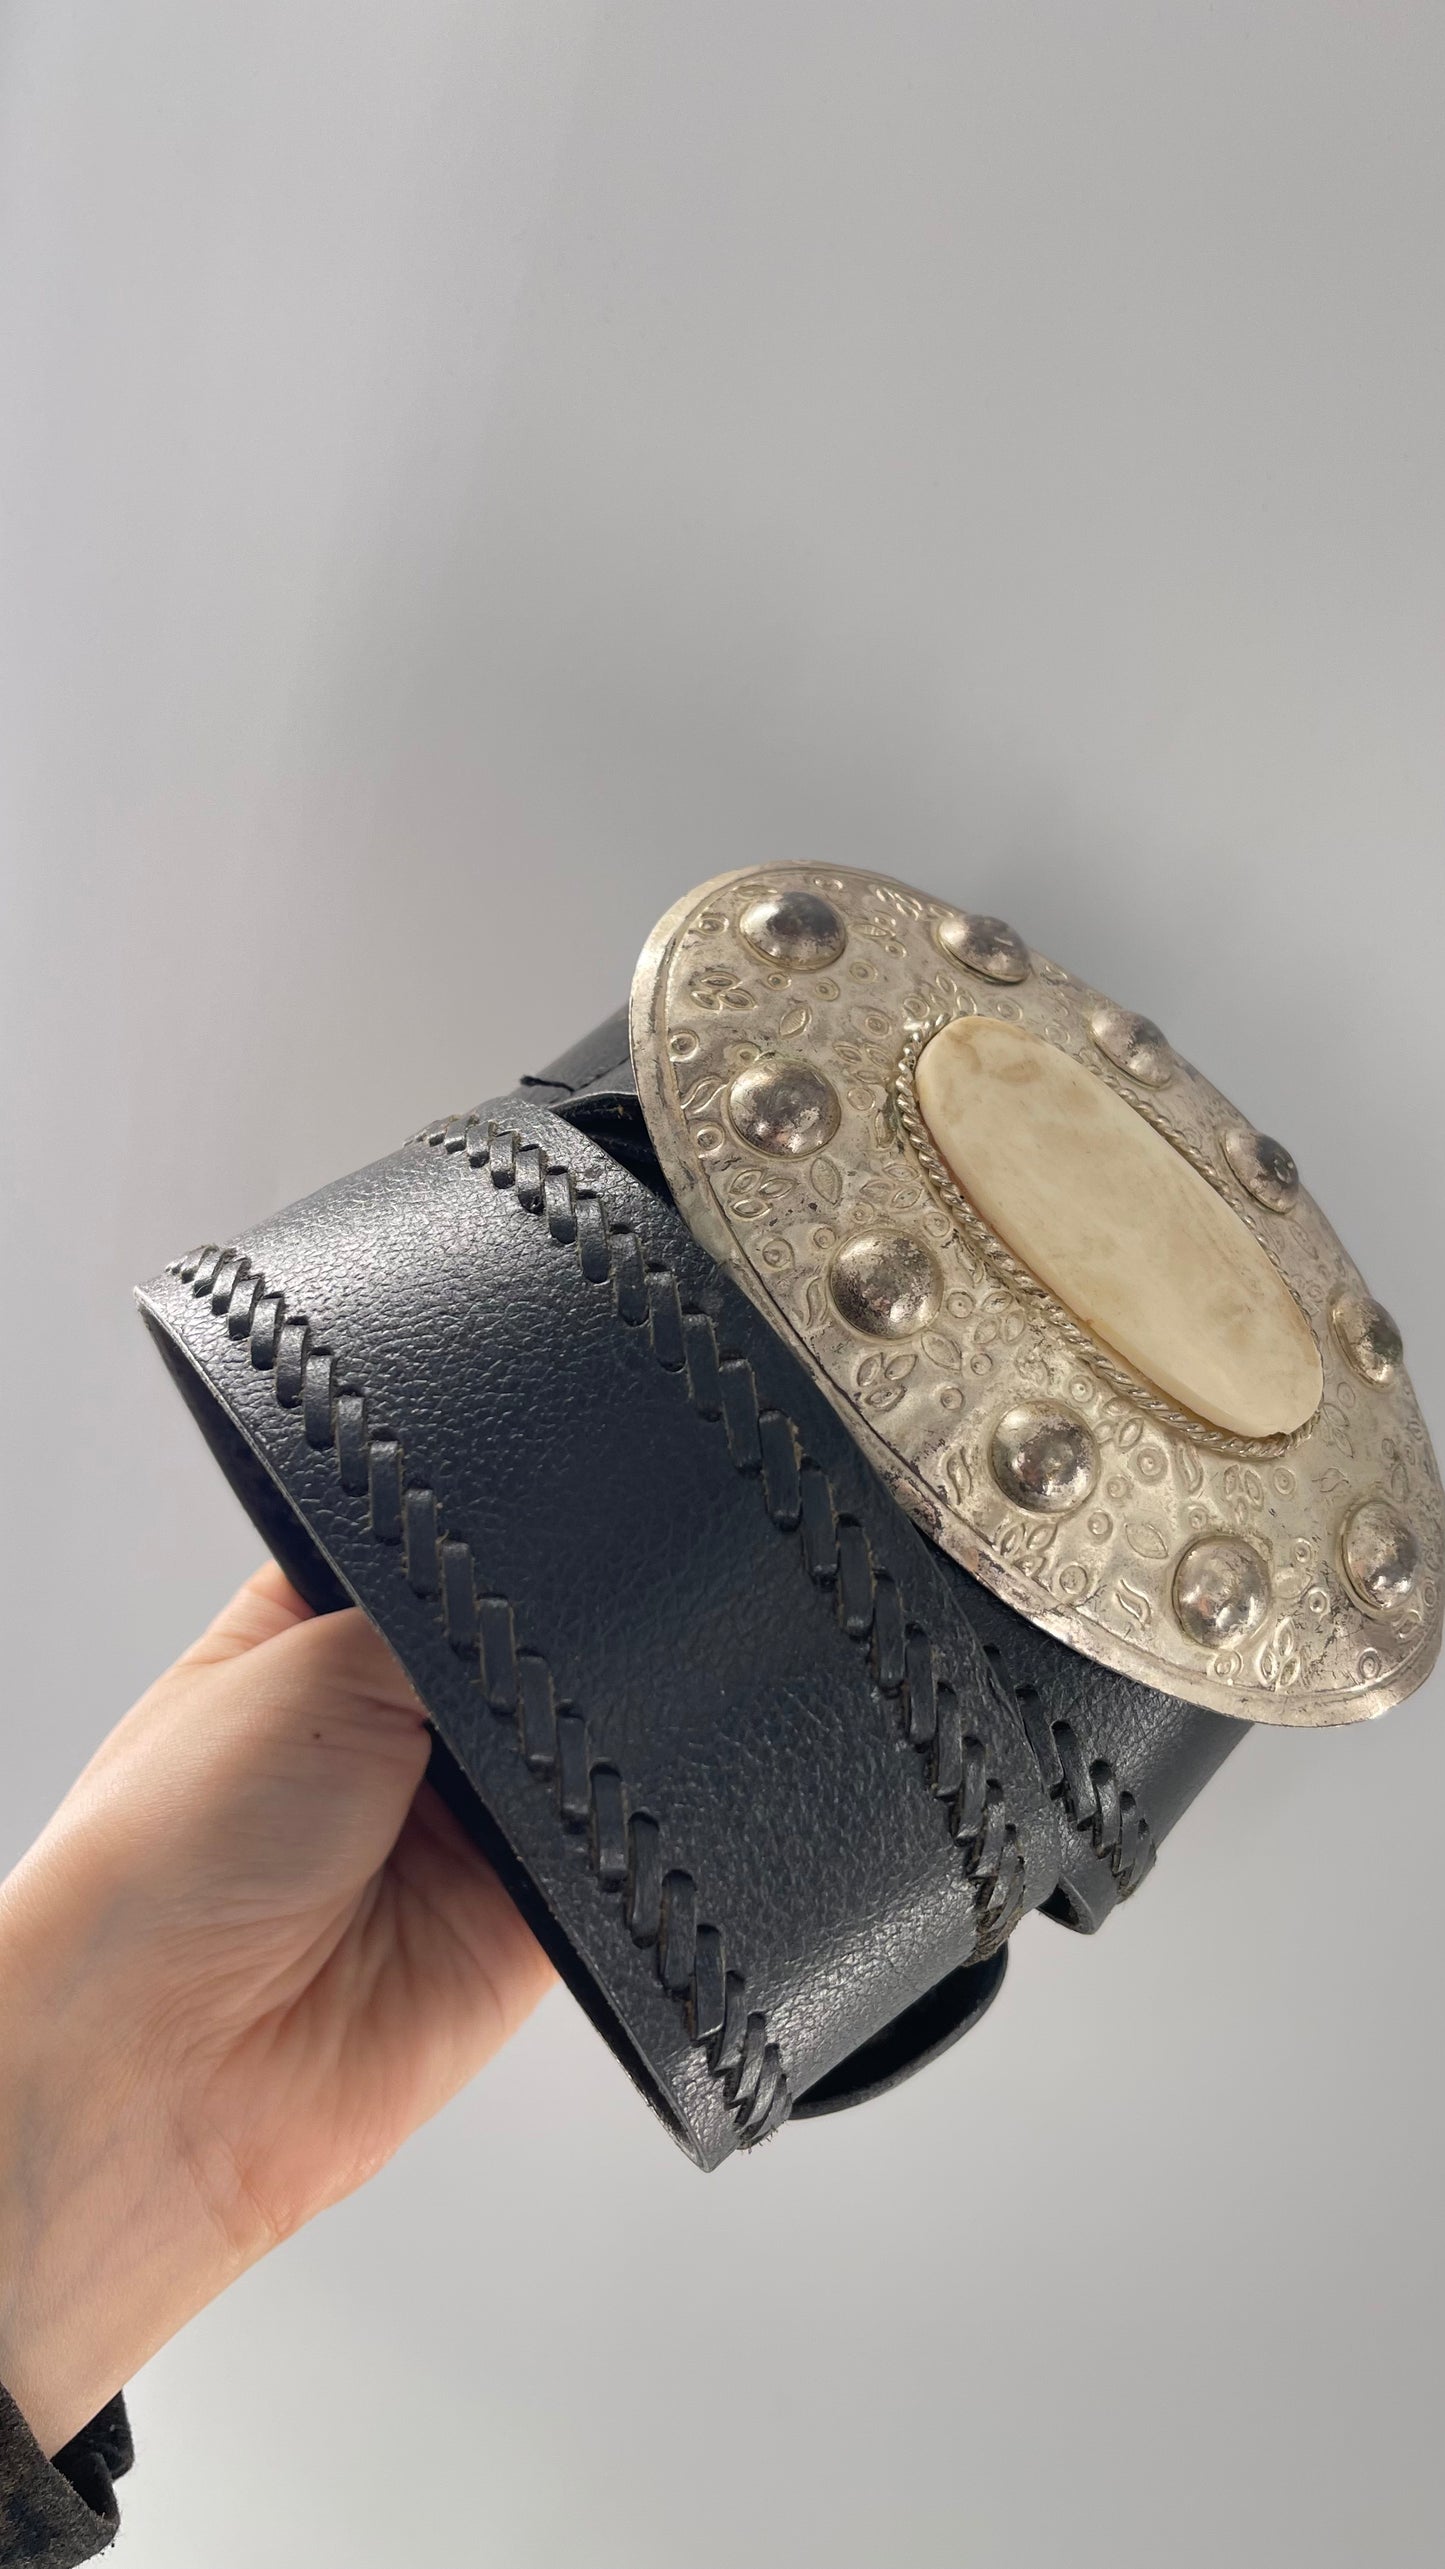 Vintage Black Leather Belt with Silver Metal Buckle with ‘Stone’ Detail (M/L)